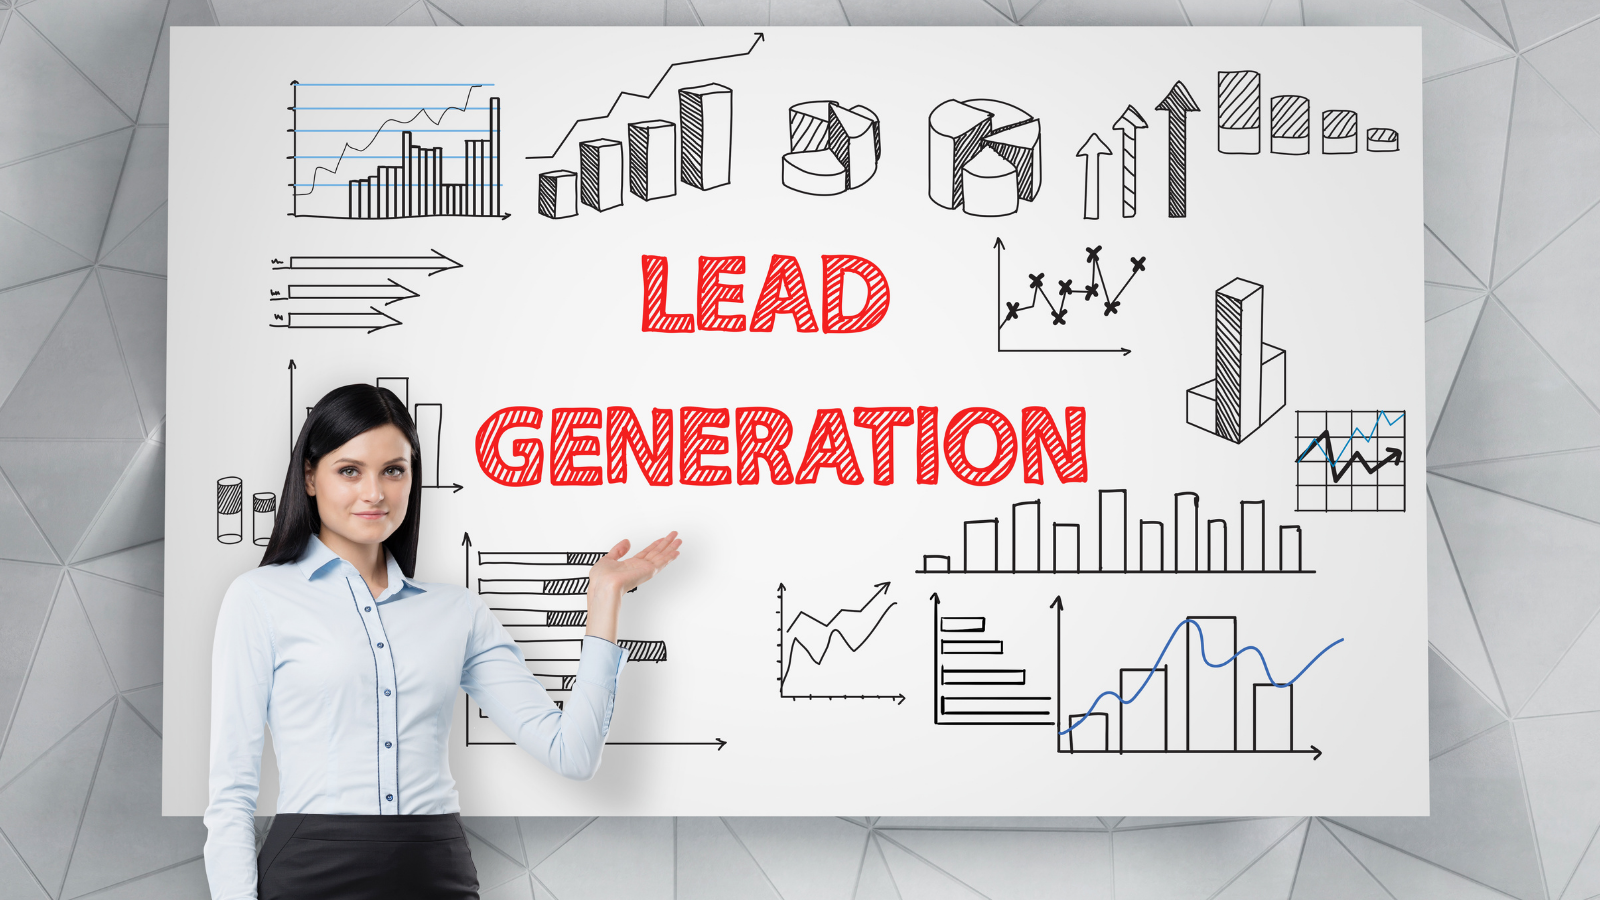 A Guide to B2B Lead Generation